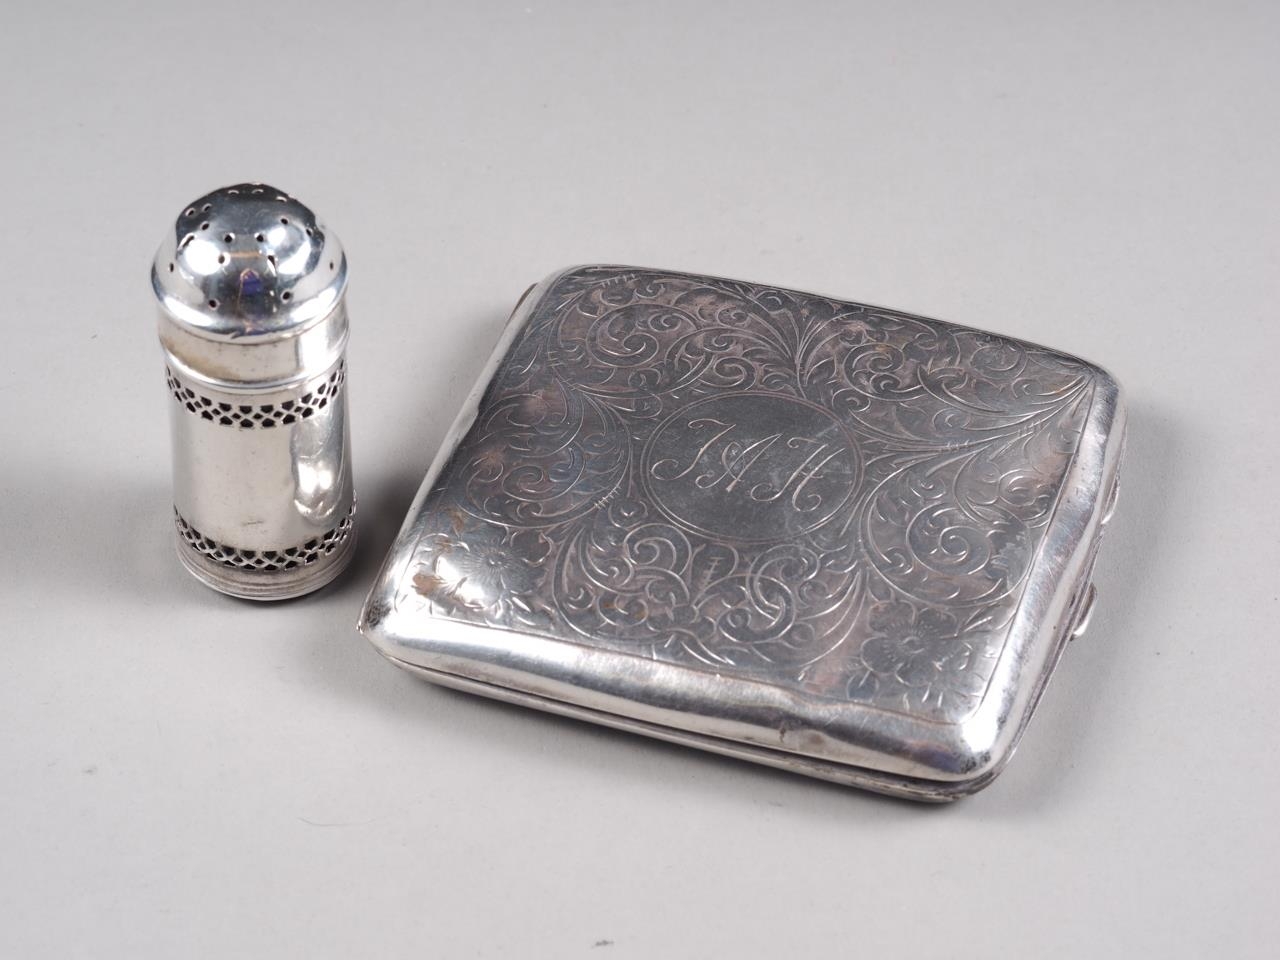 A silver cigarette case and a silver pepper shaker, 3.3oz troy approx